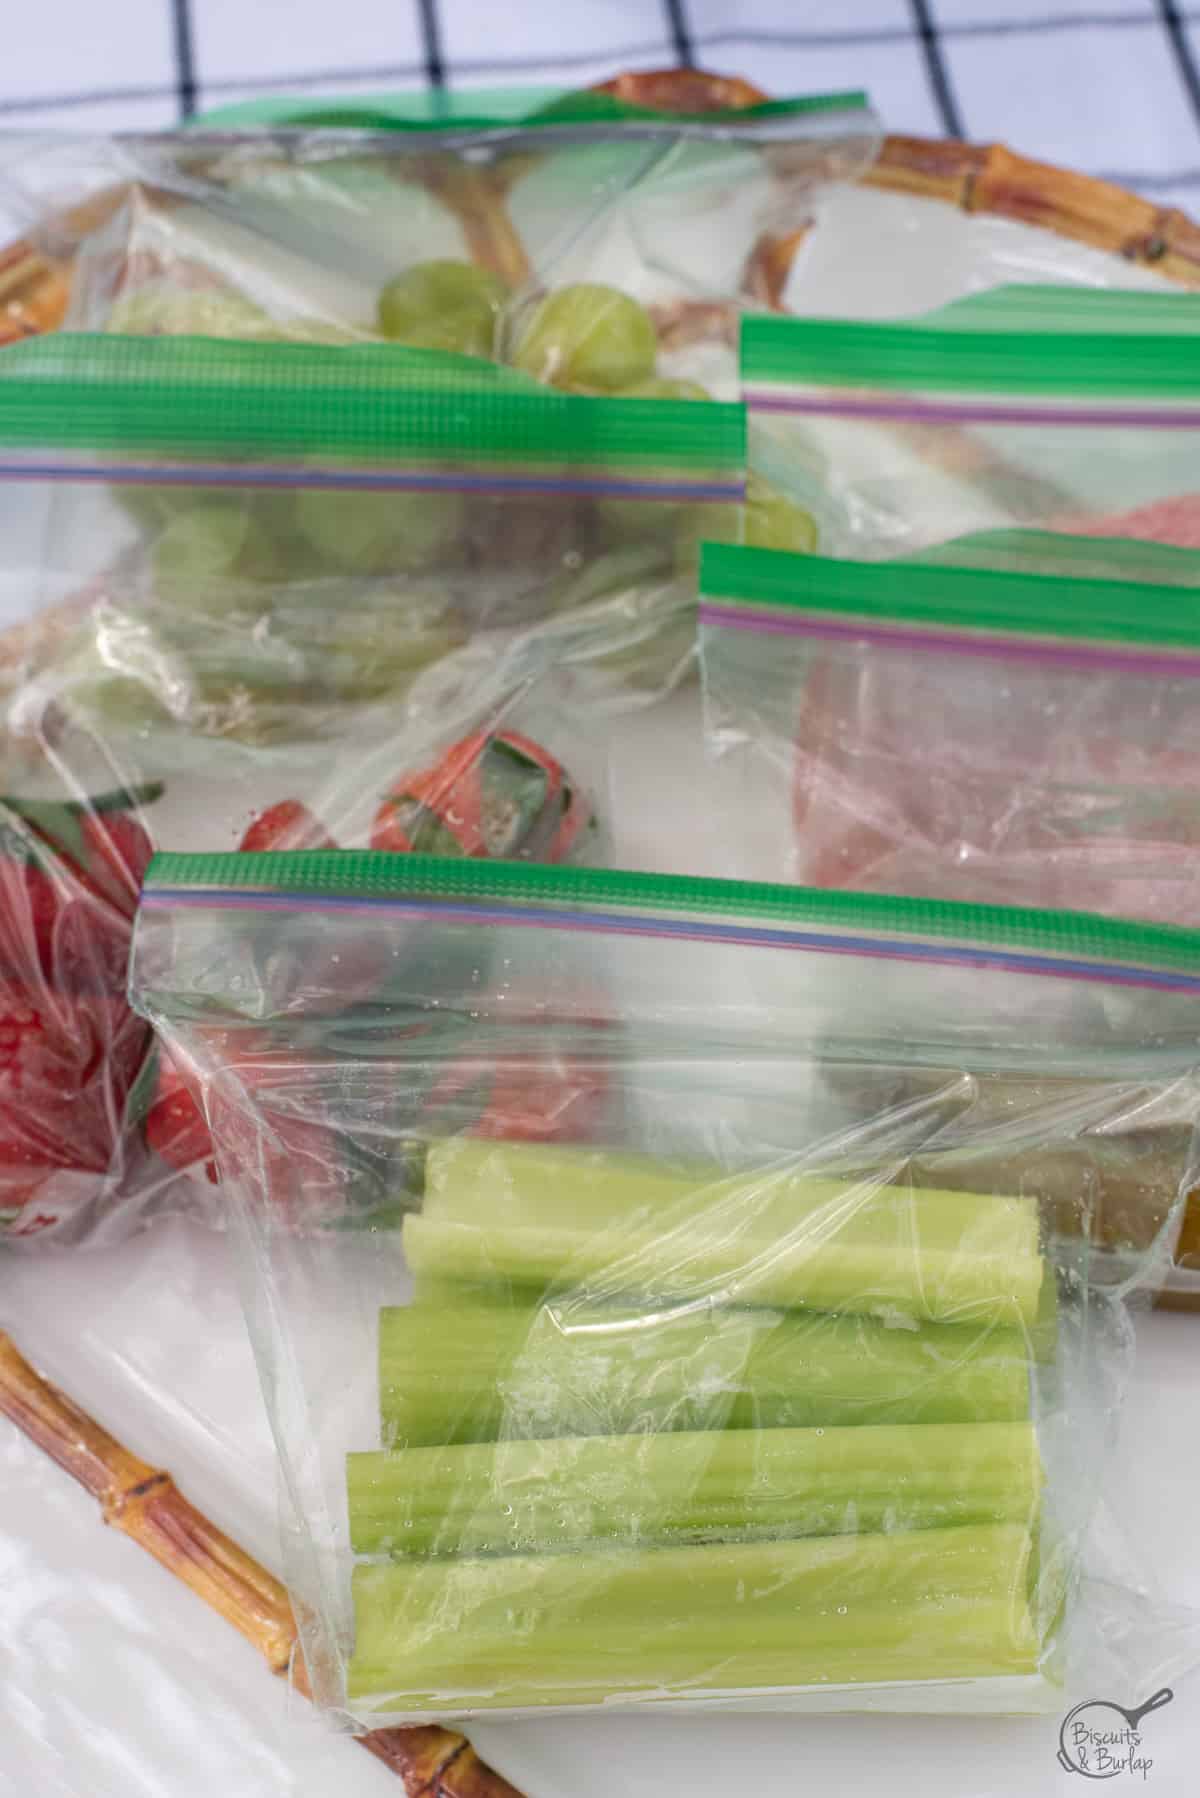 celery and other items for picnic charcuterie board in baggies. 